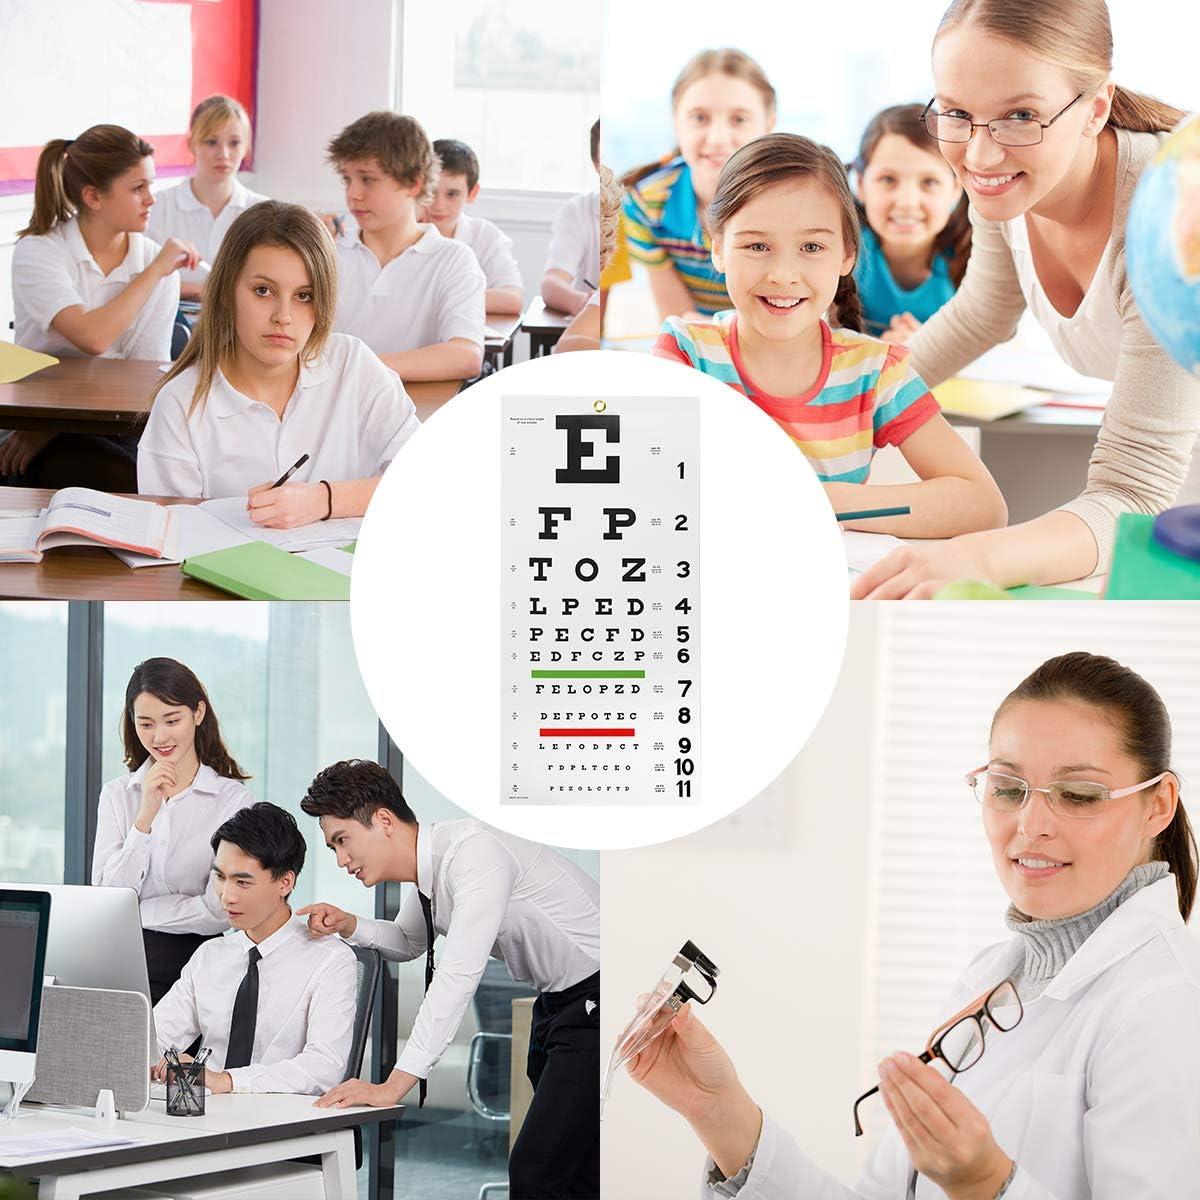 Ucansee Snellen Eye Chart Visual Acuity Chart (22x11 inches) with Eye Occluder and Pointer for Eye Exams 20 Feet